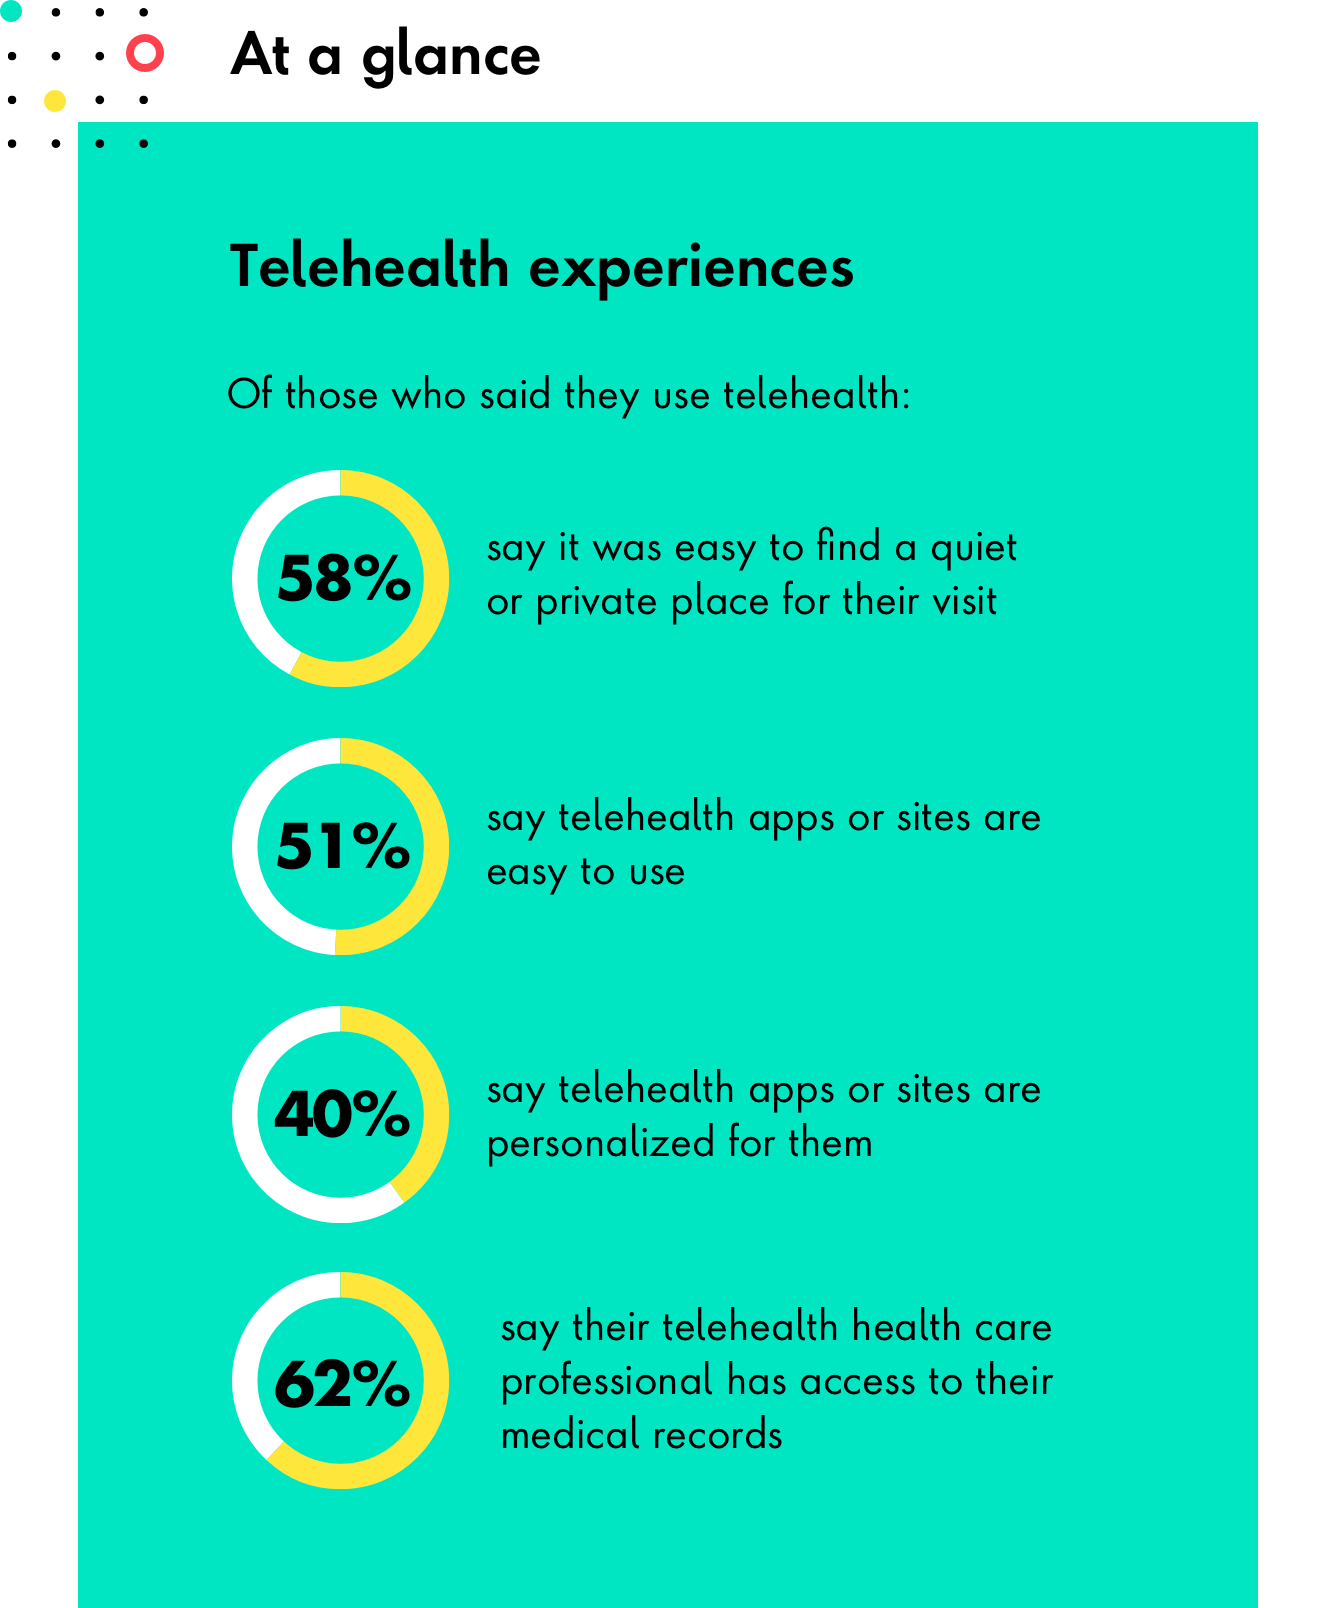 Stats on Telehealth visits: 58% said it was easy to find a private/quiet place for their visit. 51% said telemedicine app/site was easy to use. 40% siad telemedicine app/site was personalized for them. 62% said their telemedicine healthcare professional had access to their medical records.